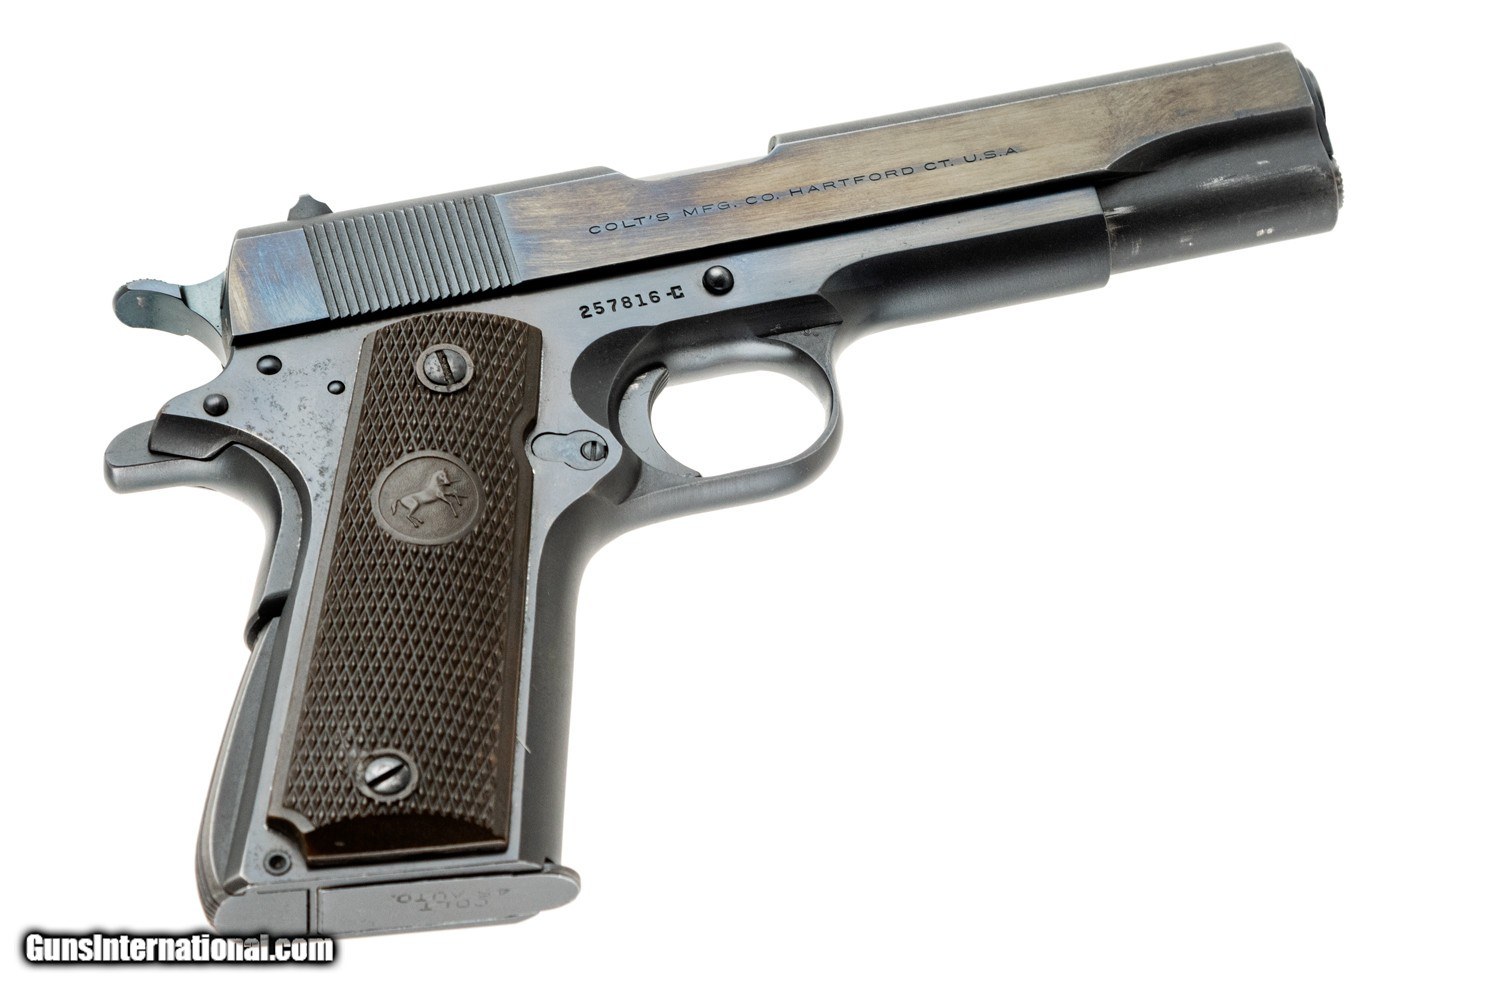 Colt Government Model Commercial 45 Acp 6324